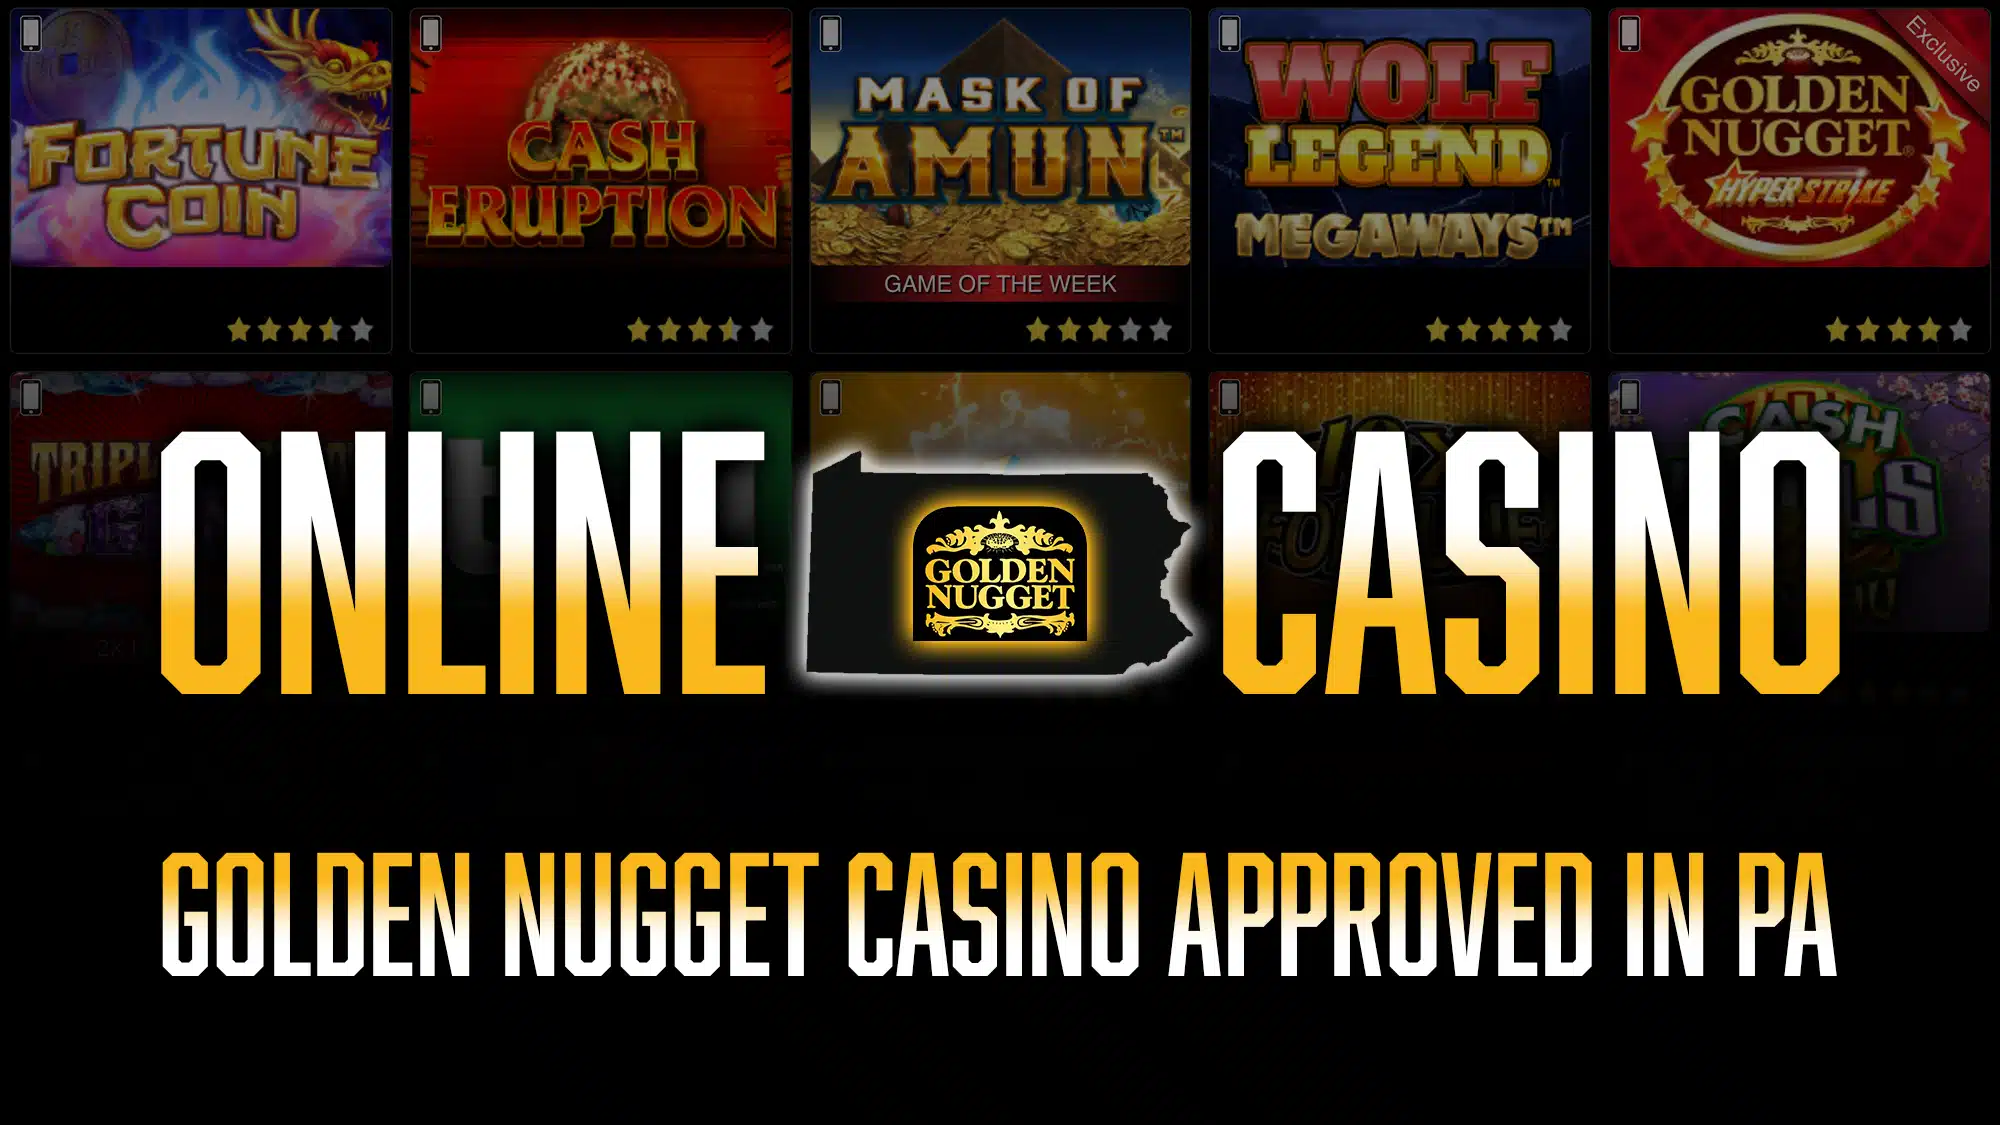 Golden Nugget PA Online Casino Approval